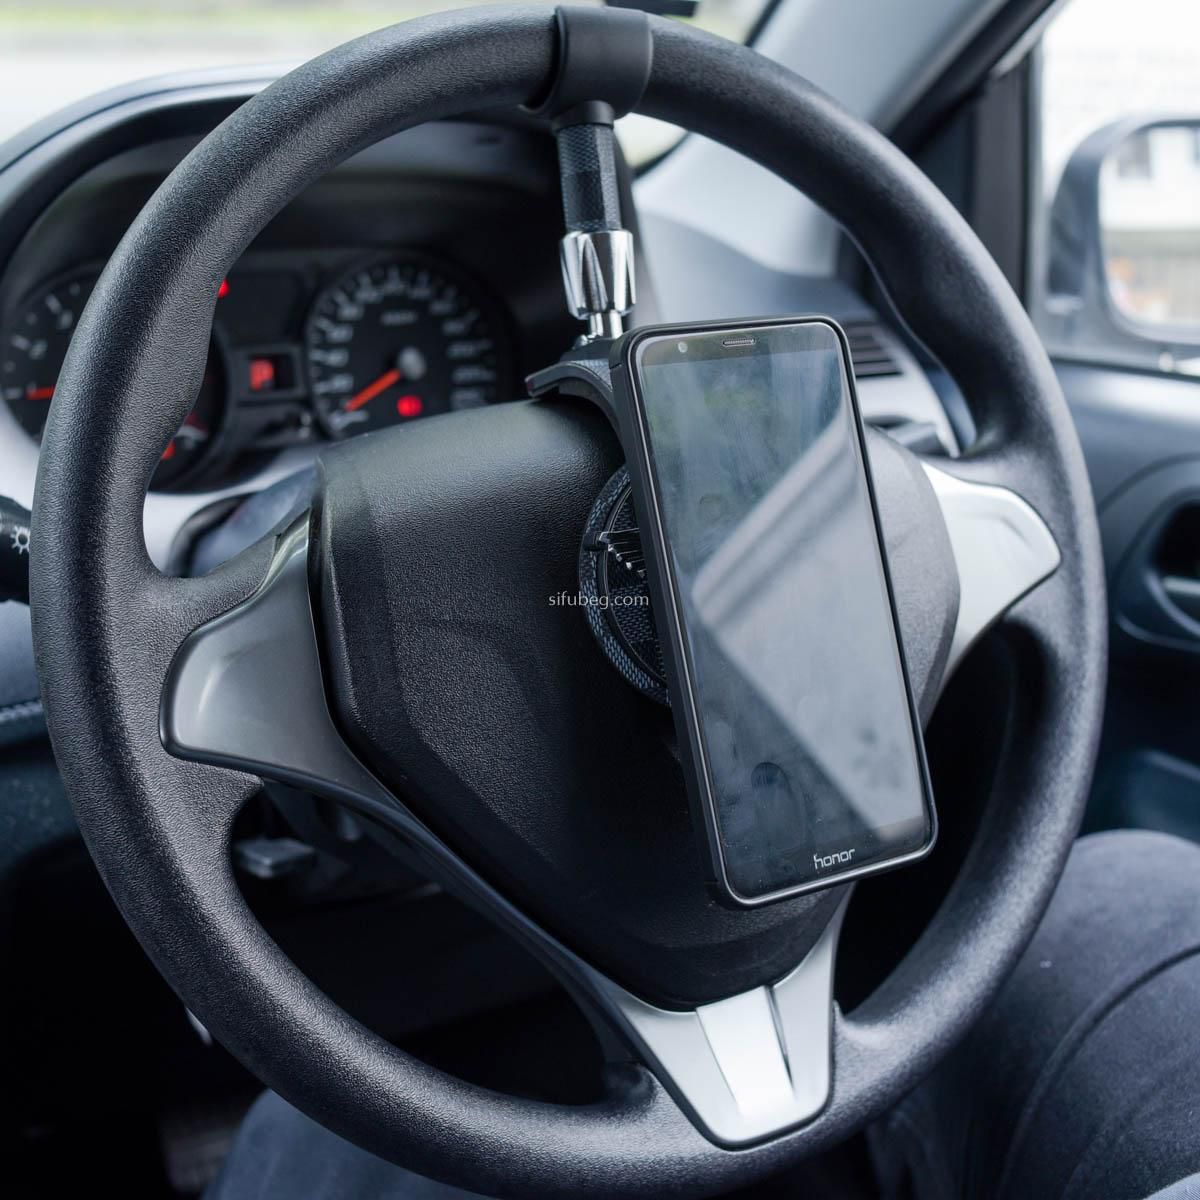 Zhyofa Gyro Phone Holder for Car (3 Colors)